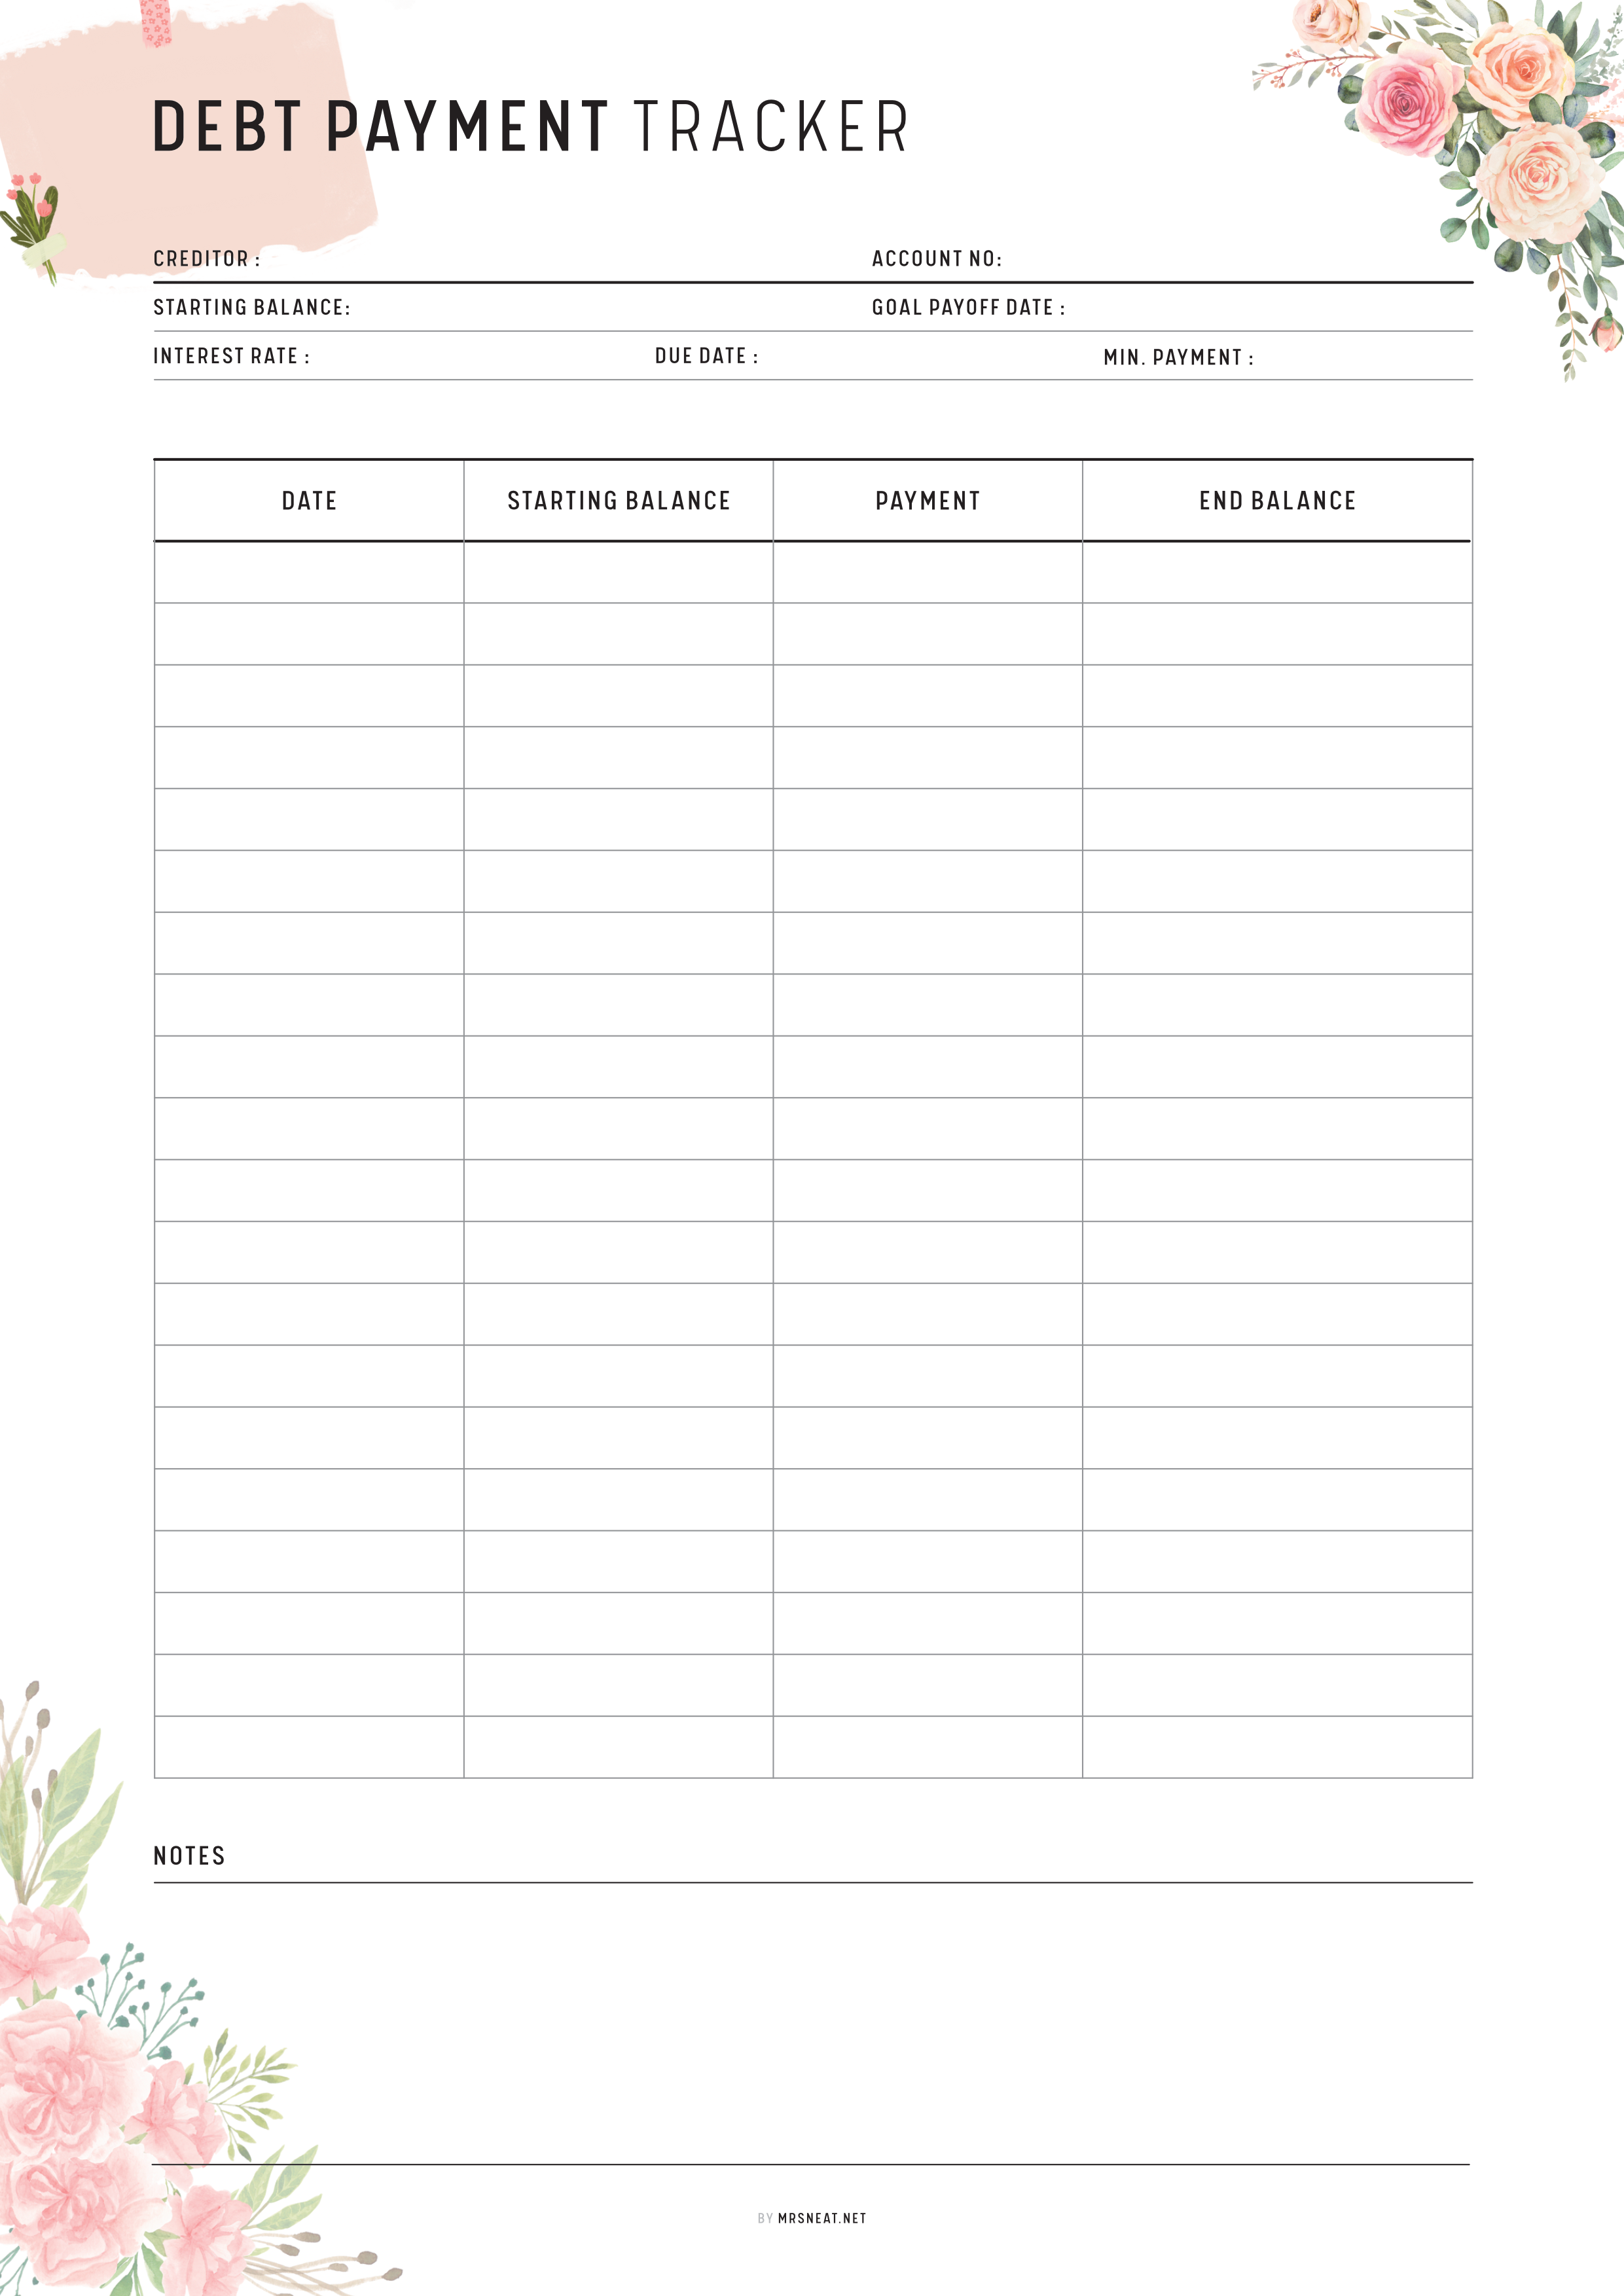 Floral Debt Payment Tracker Template - 2 Pages